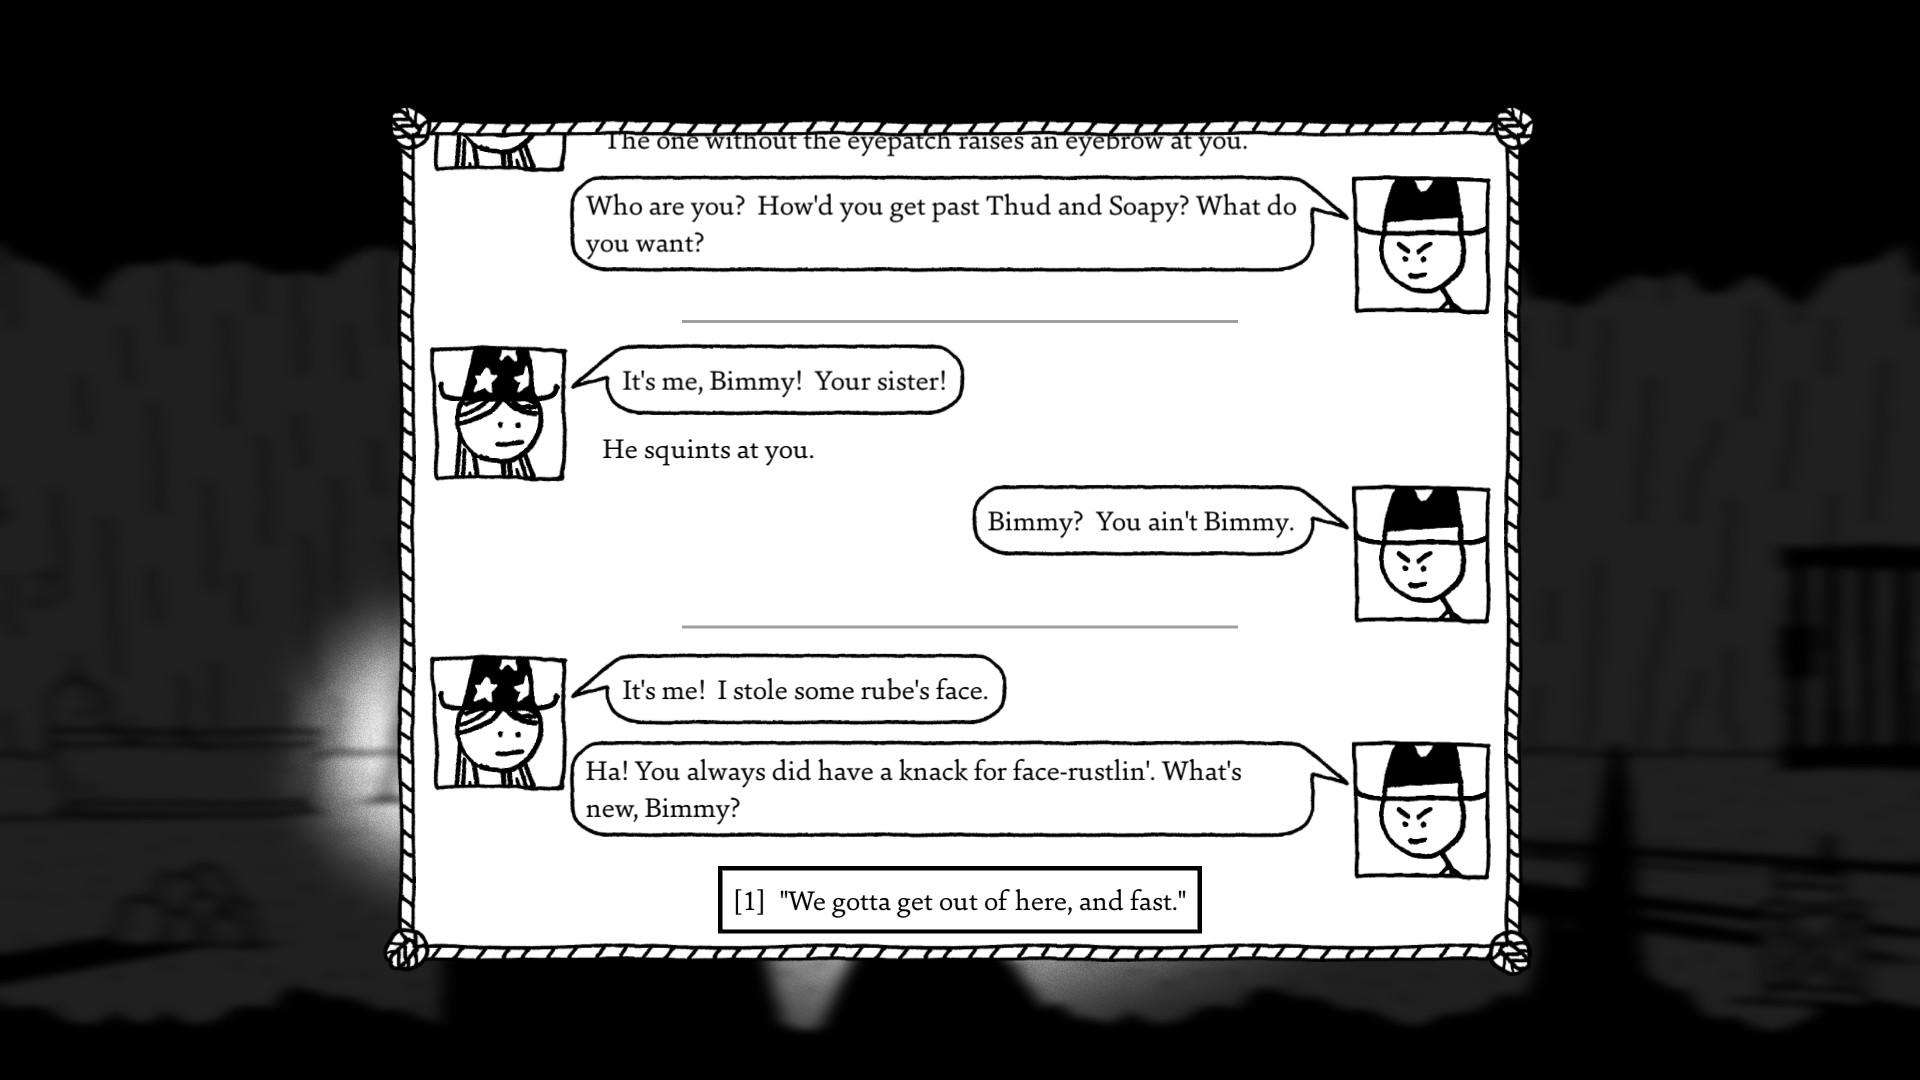 West Of Loathing Is A Very Funny Cowboy Game